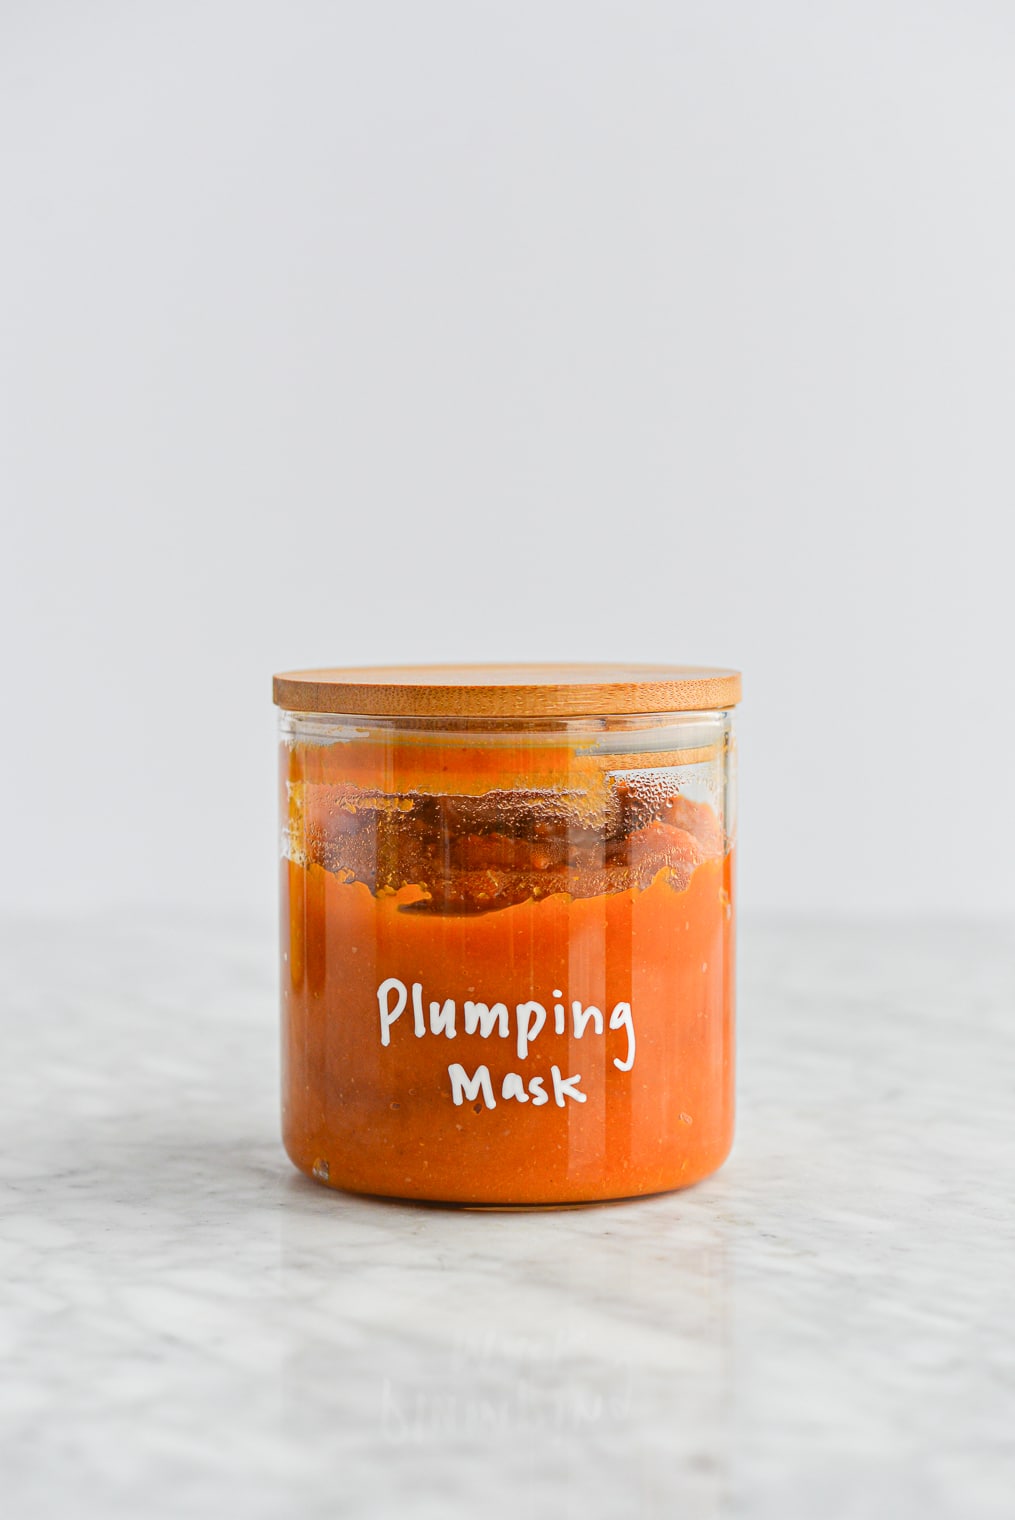 homemade pumpkin mask in a glass jar with a wooden lid with plumping mask written on it in white letters on a marble surface